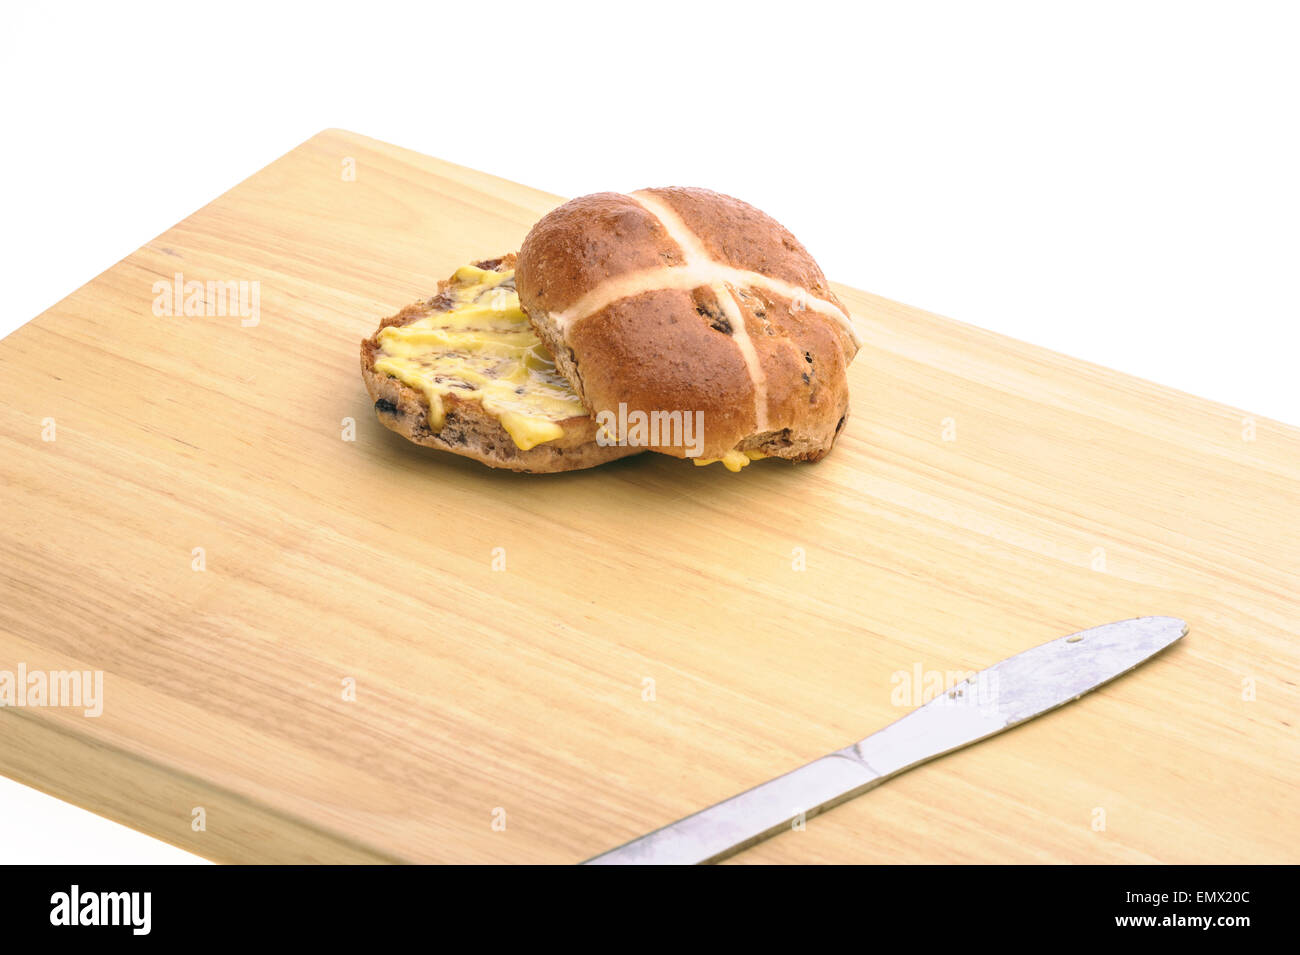 Hot cross bun with knife on a wooden board. Stock Photo